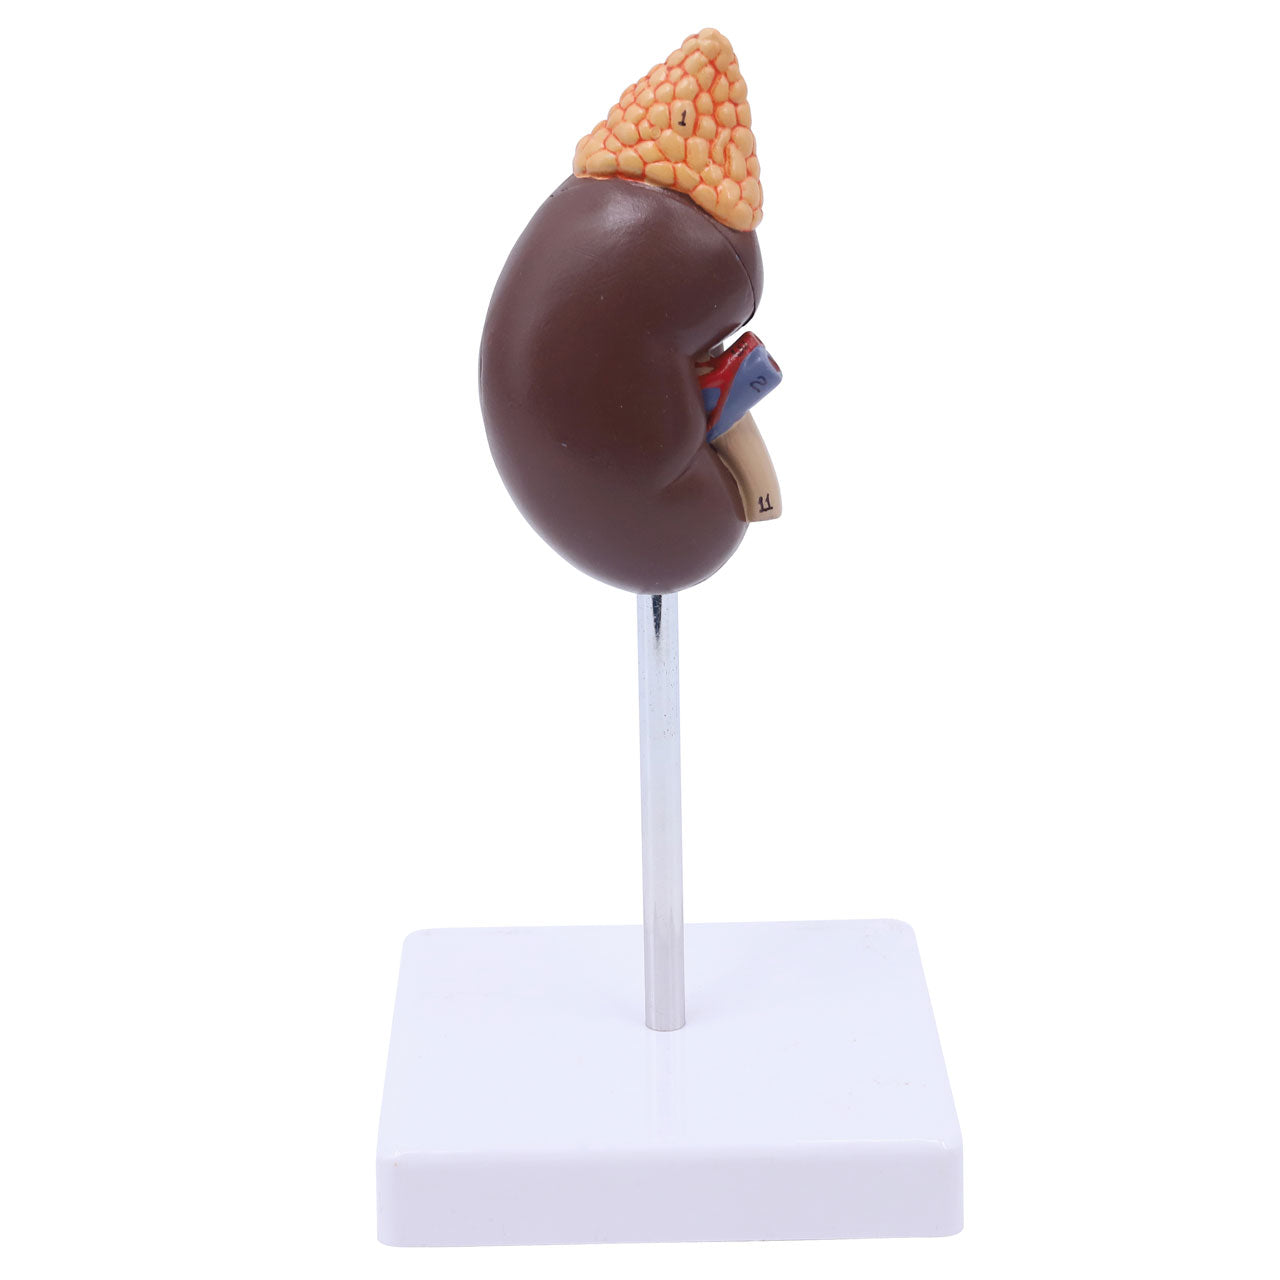 Evotech Scientific Life-size Human Kidney with Adrenal Gland Model 